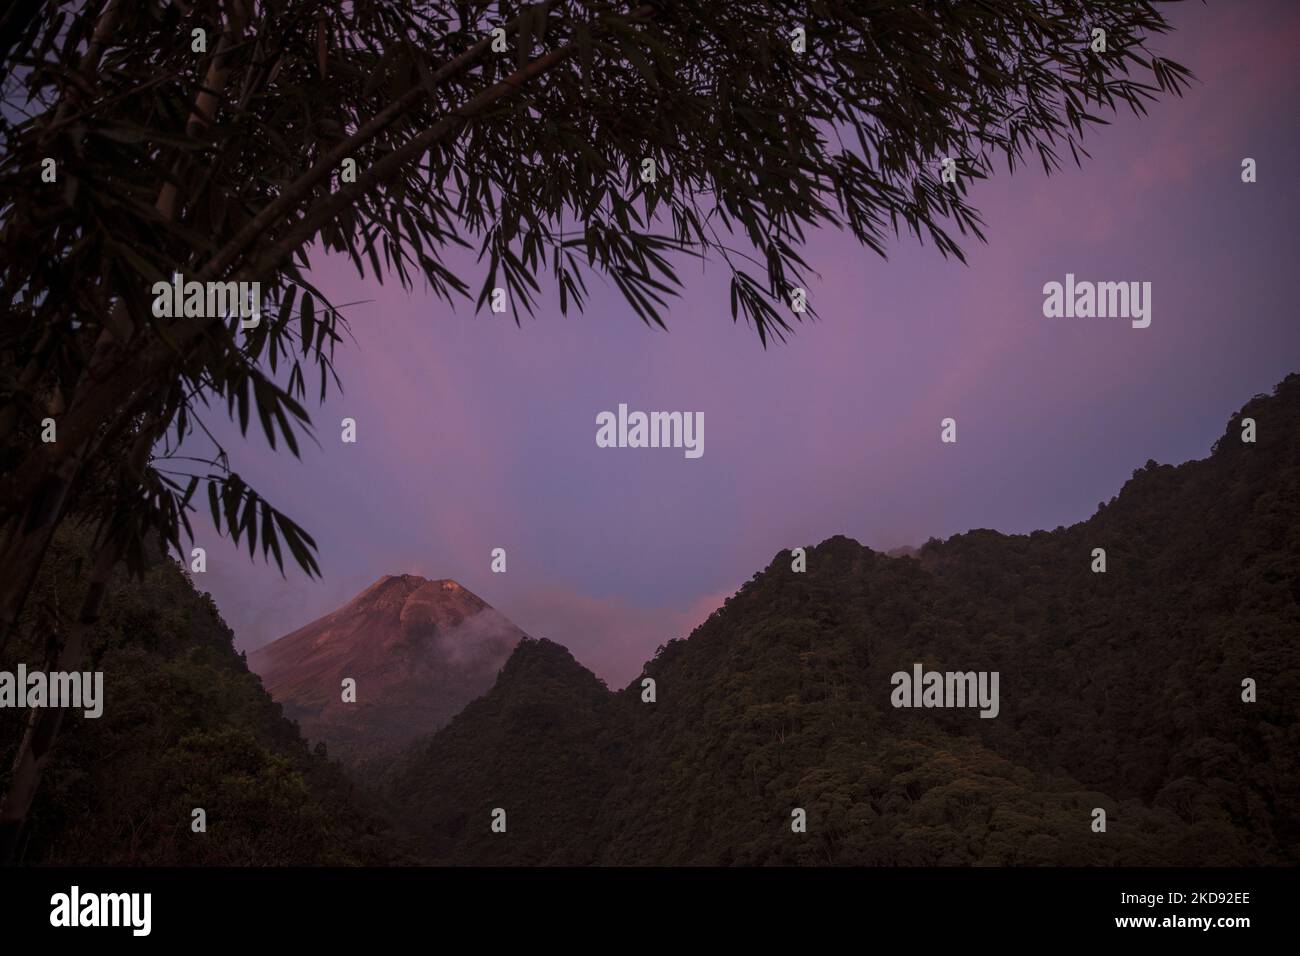 The scenery of Mount Merapi volcano by sunset is seen from Turgo village, Sleman district in Yogyakarta, Indonesia on January 3, 2022. Merapi is located in one of the most densely populated parts of Java with over 11,000 people living on the slopes of the mountain. Mount Merapi, measuring 2,968 metres high, is known as one of the most active volcanoes in Indonesia, with an eruption occurring every two to five years. (Photo by Garry Lotulung/NurPhoto) Stock Photo